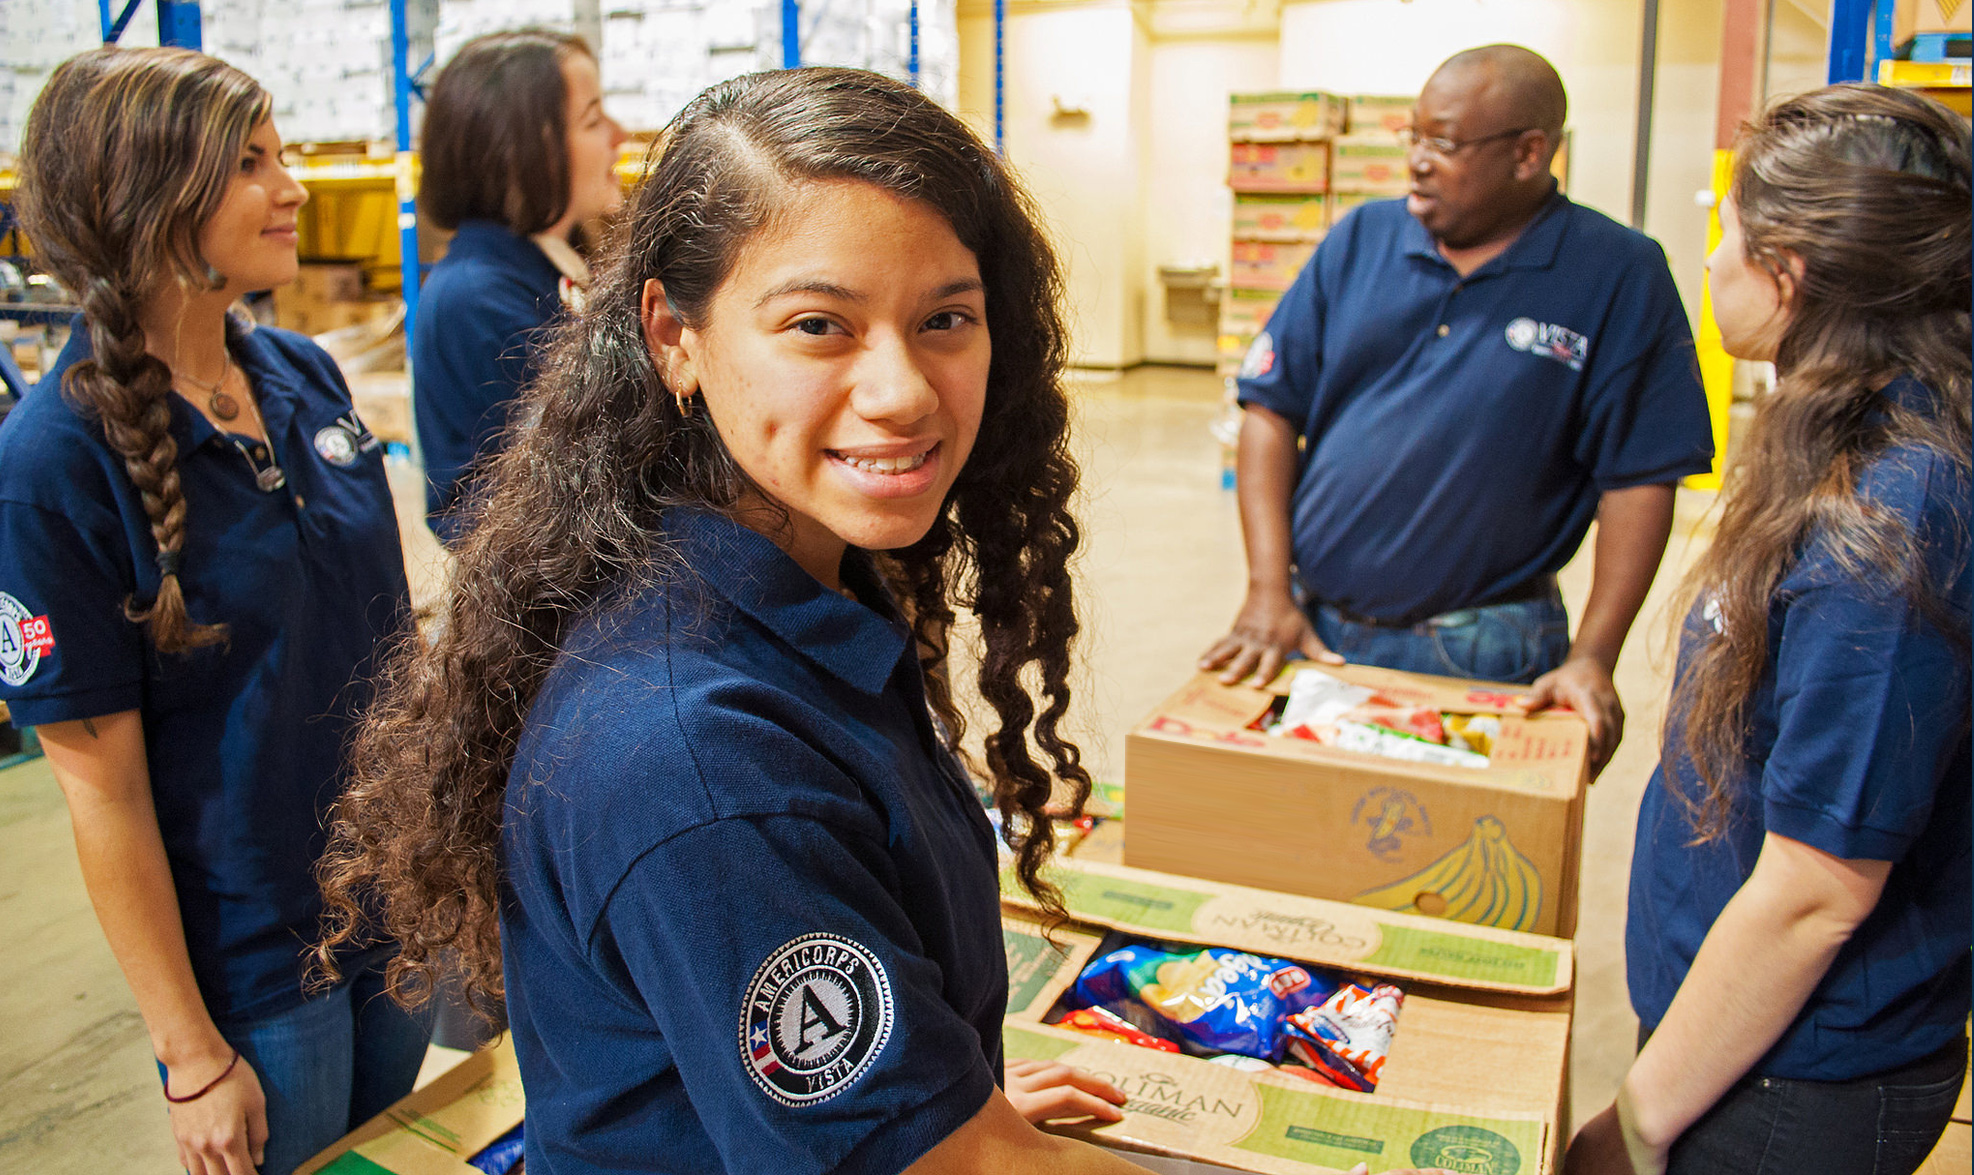 Volunteers in blue t-shirts pack boxes with food.